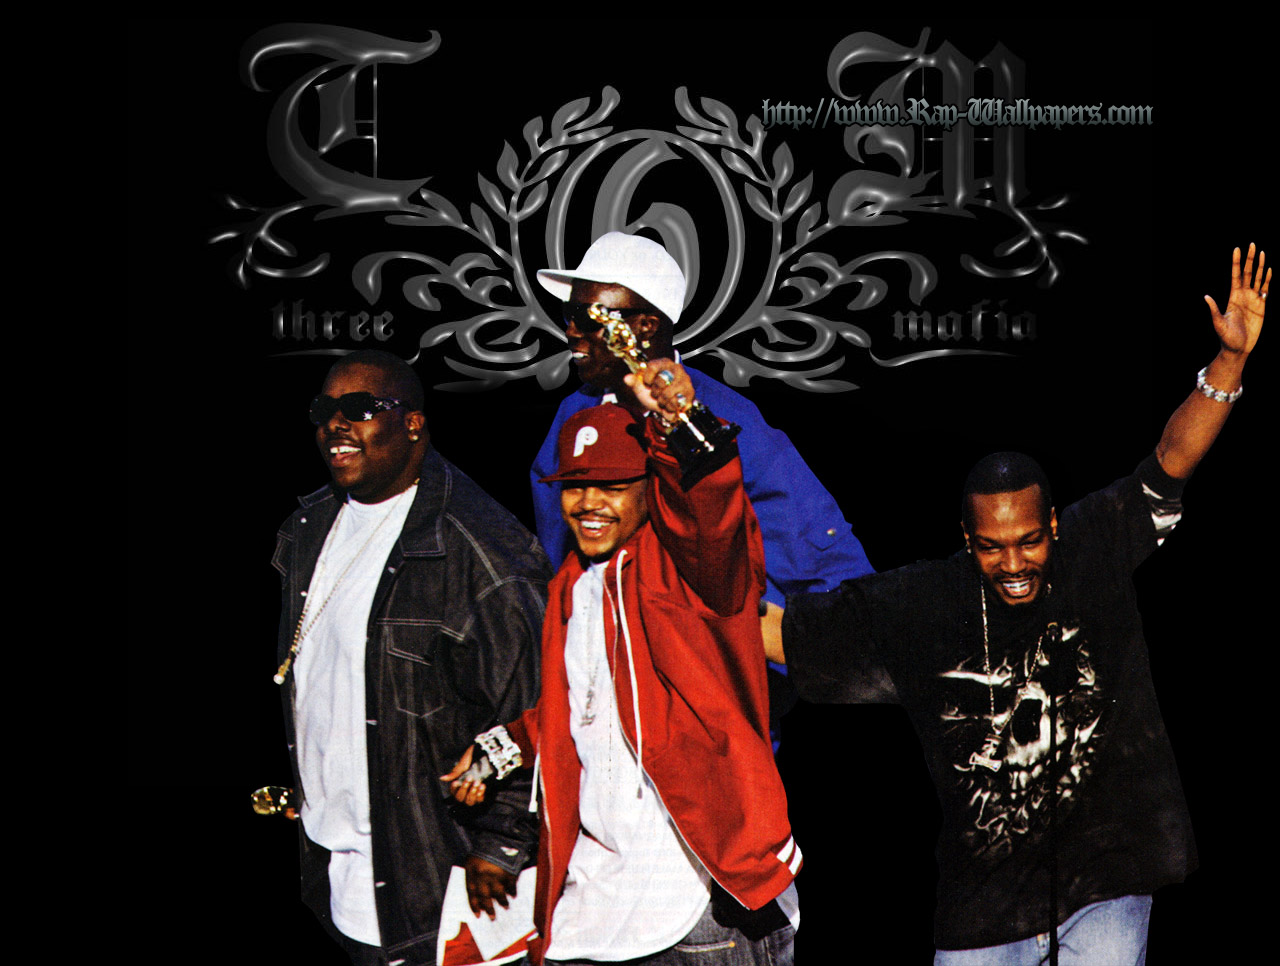  click on the wallpaper and choose 'Save Picture As' three 6 mafia 04